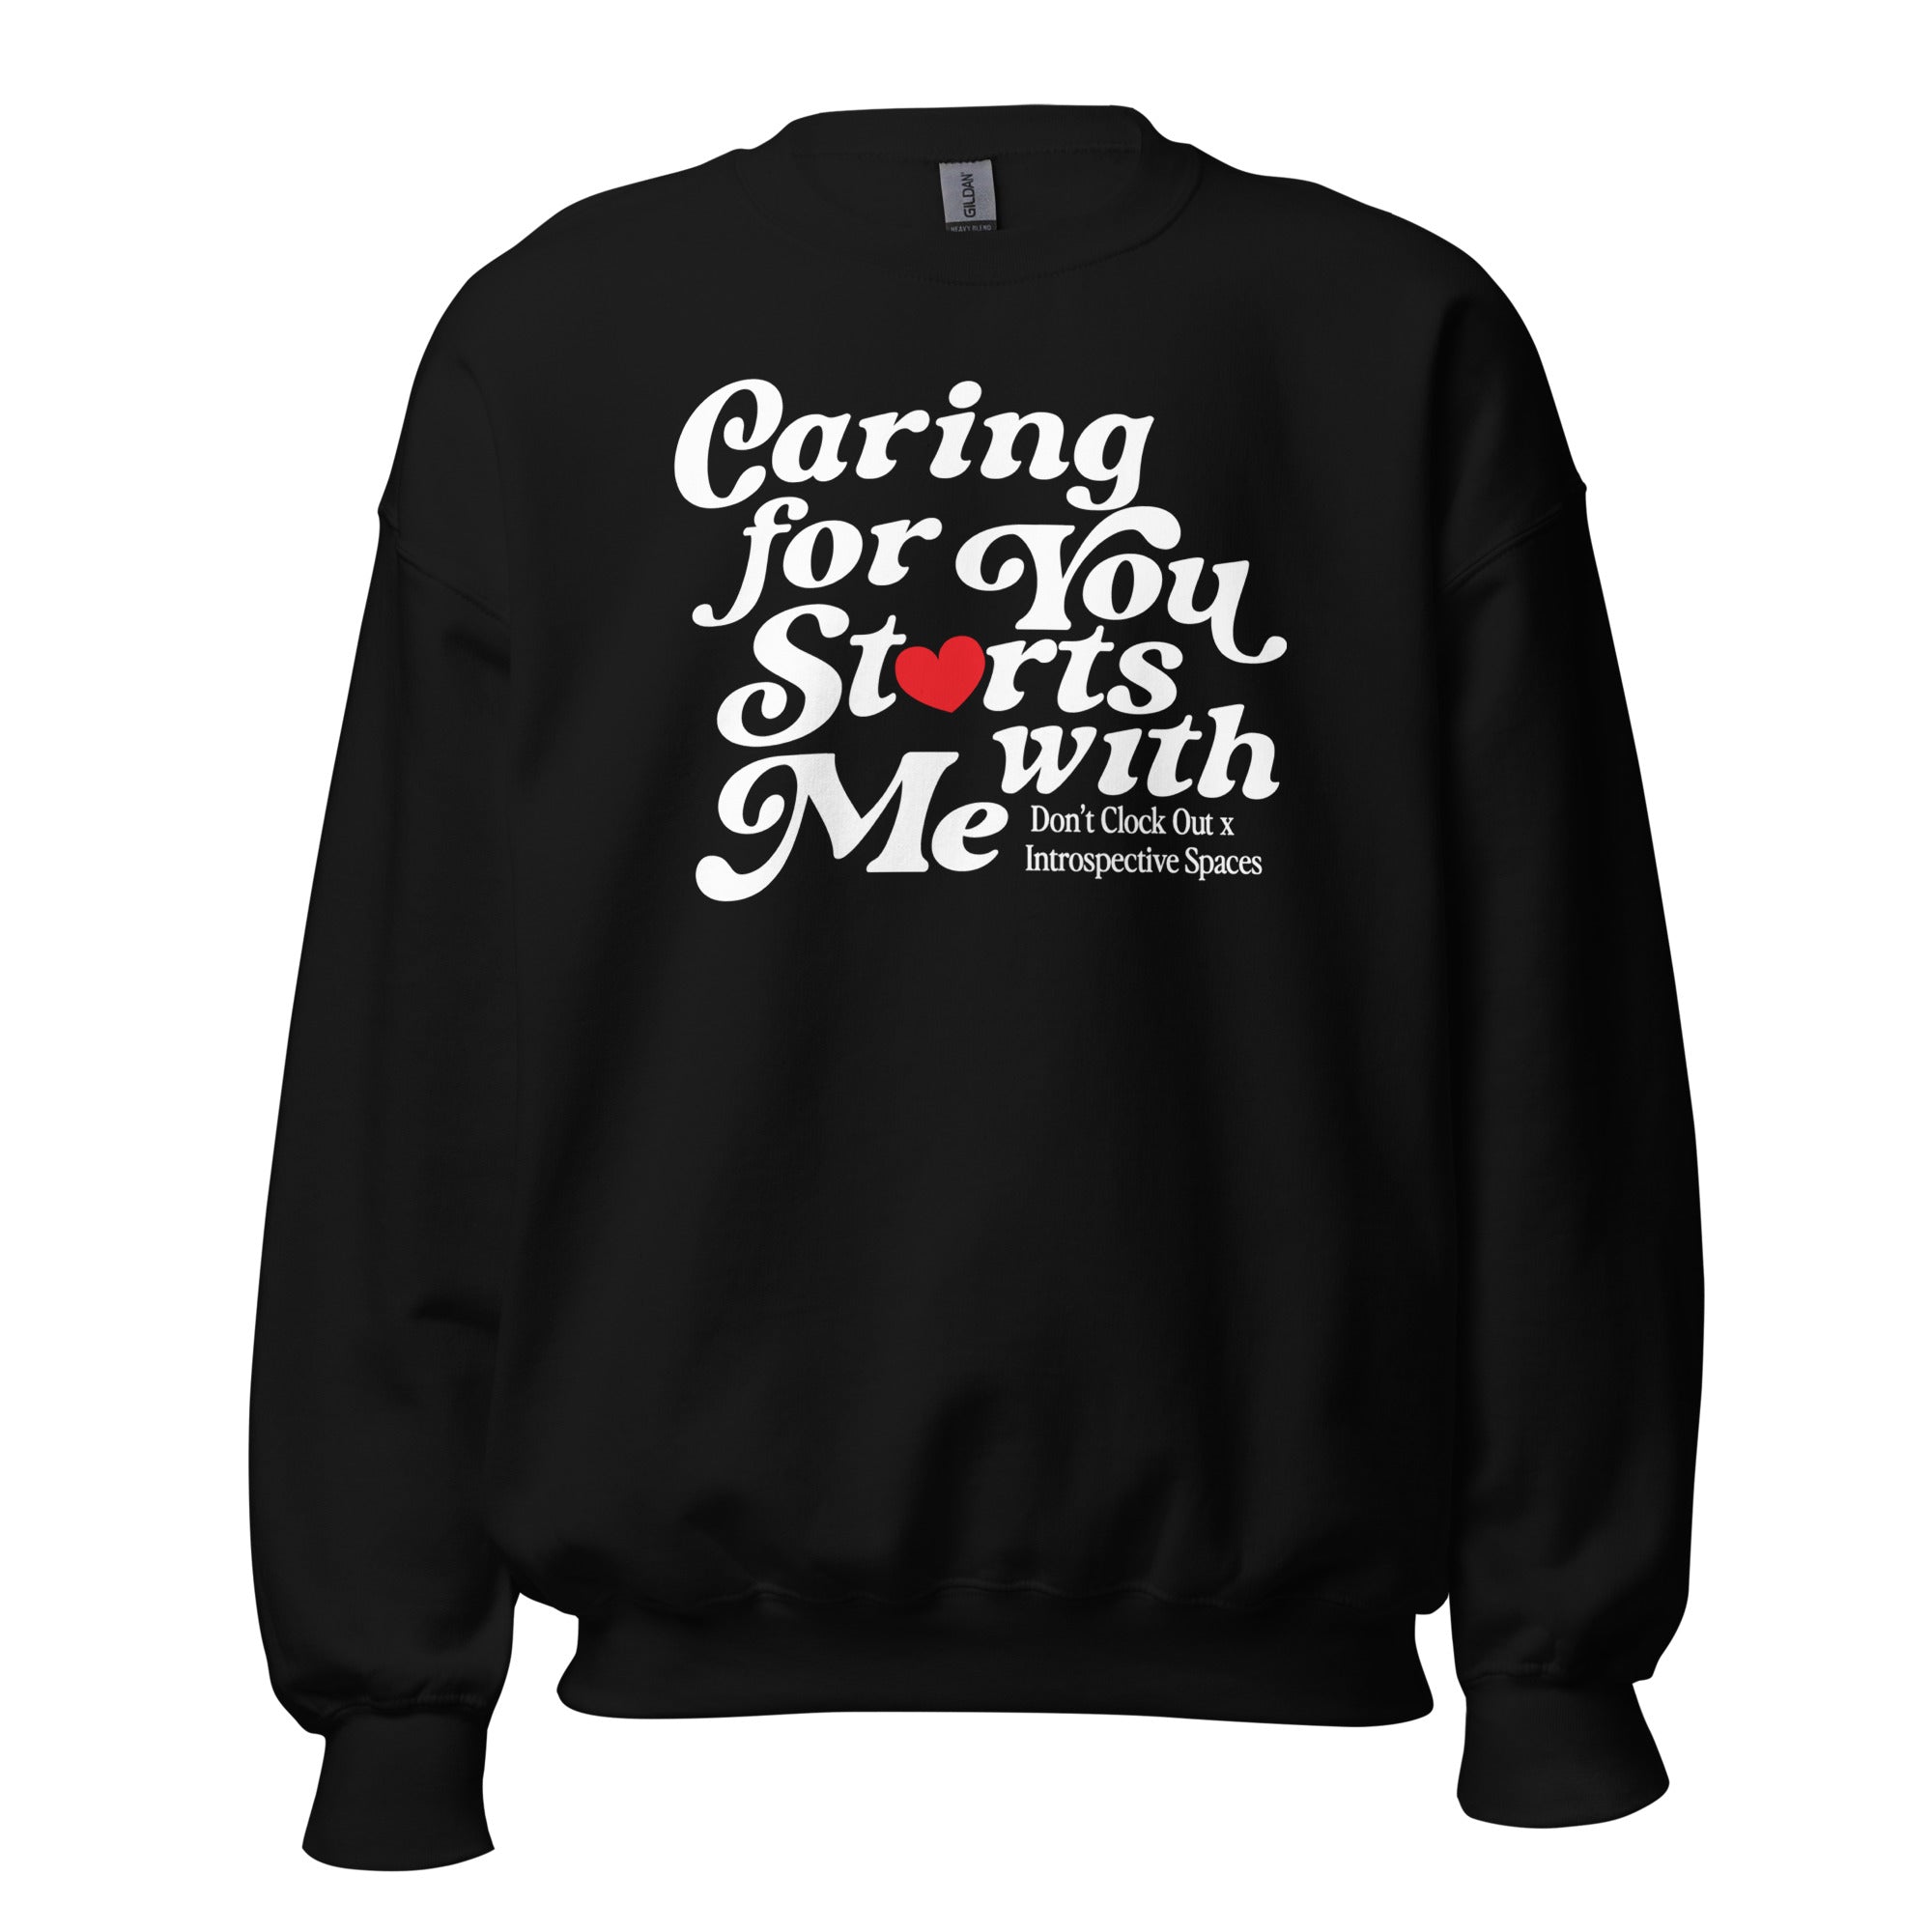 Caring for You Starts With Me Crewneck - Black or Charcoal